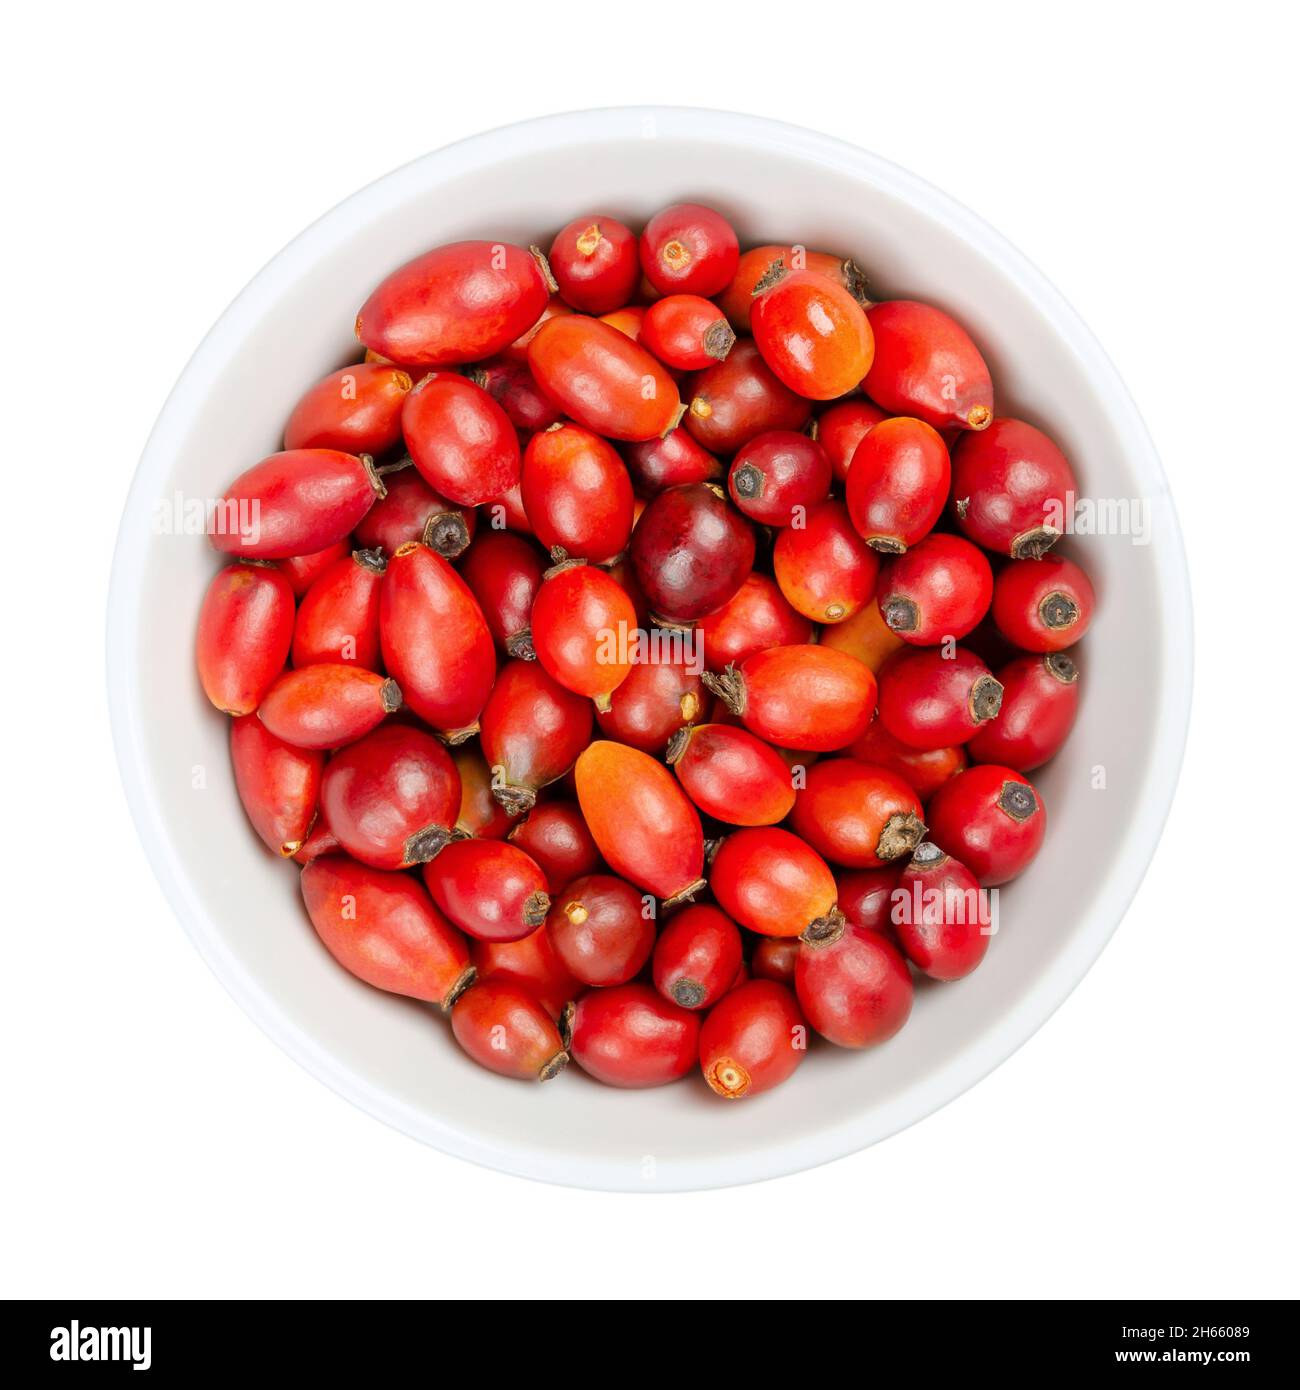 Fresh wild rose hips, in a white bowl. Also known as rose haw or rose hep. Ripe and intense red fruits, used for herbal teas, jam and can be eaten raw Stock Photo